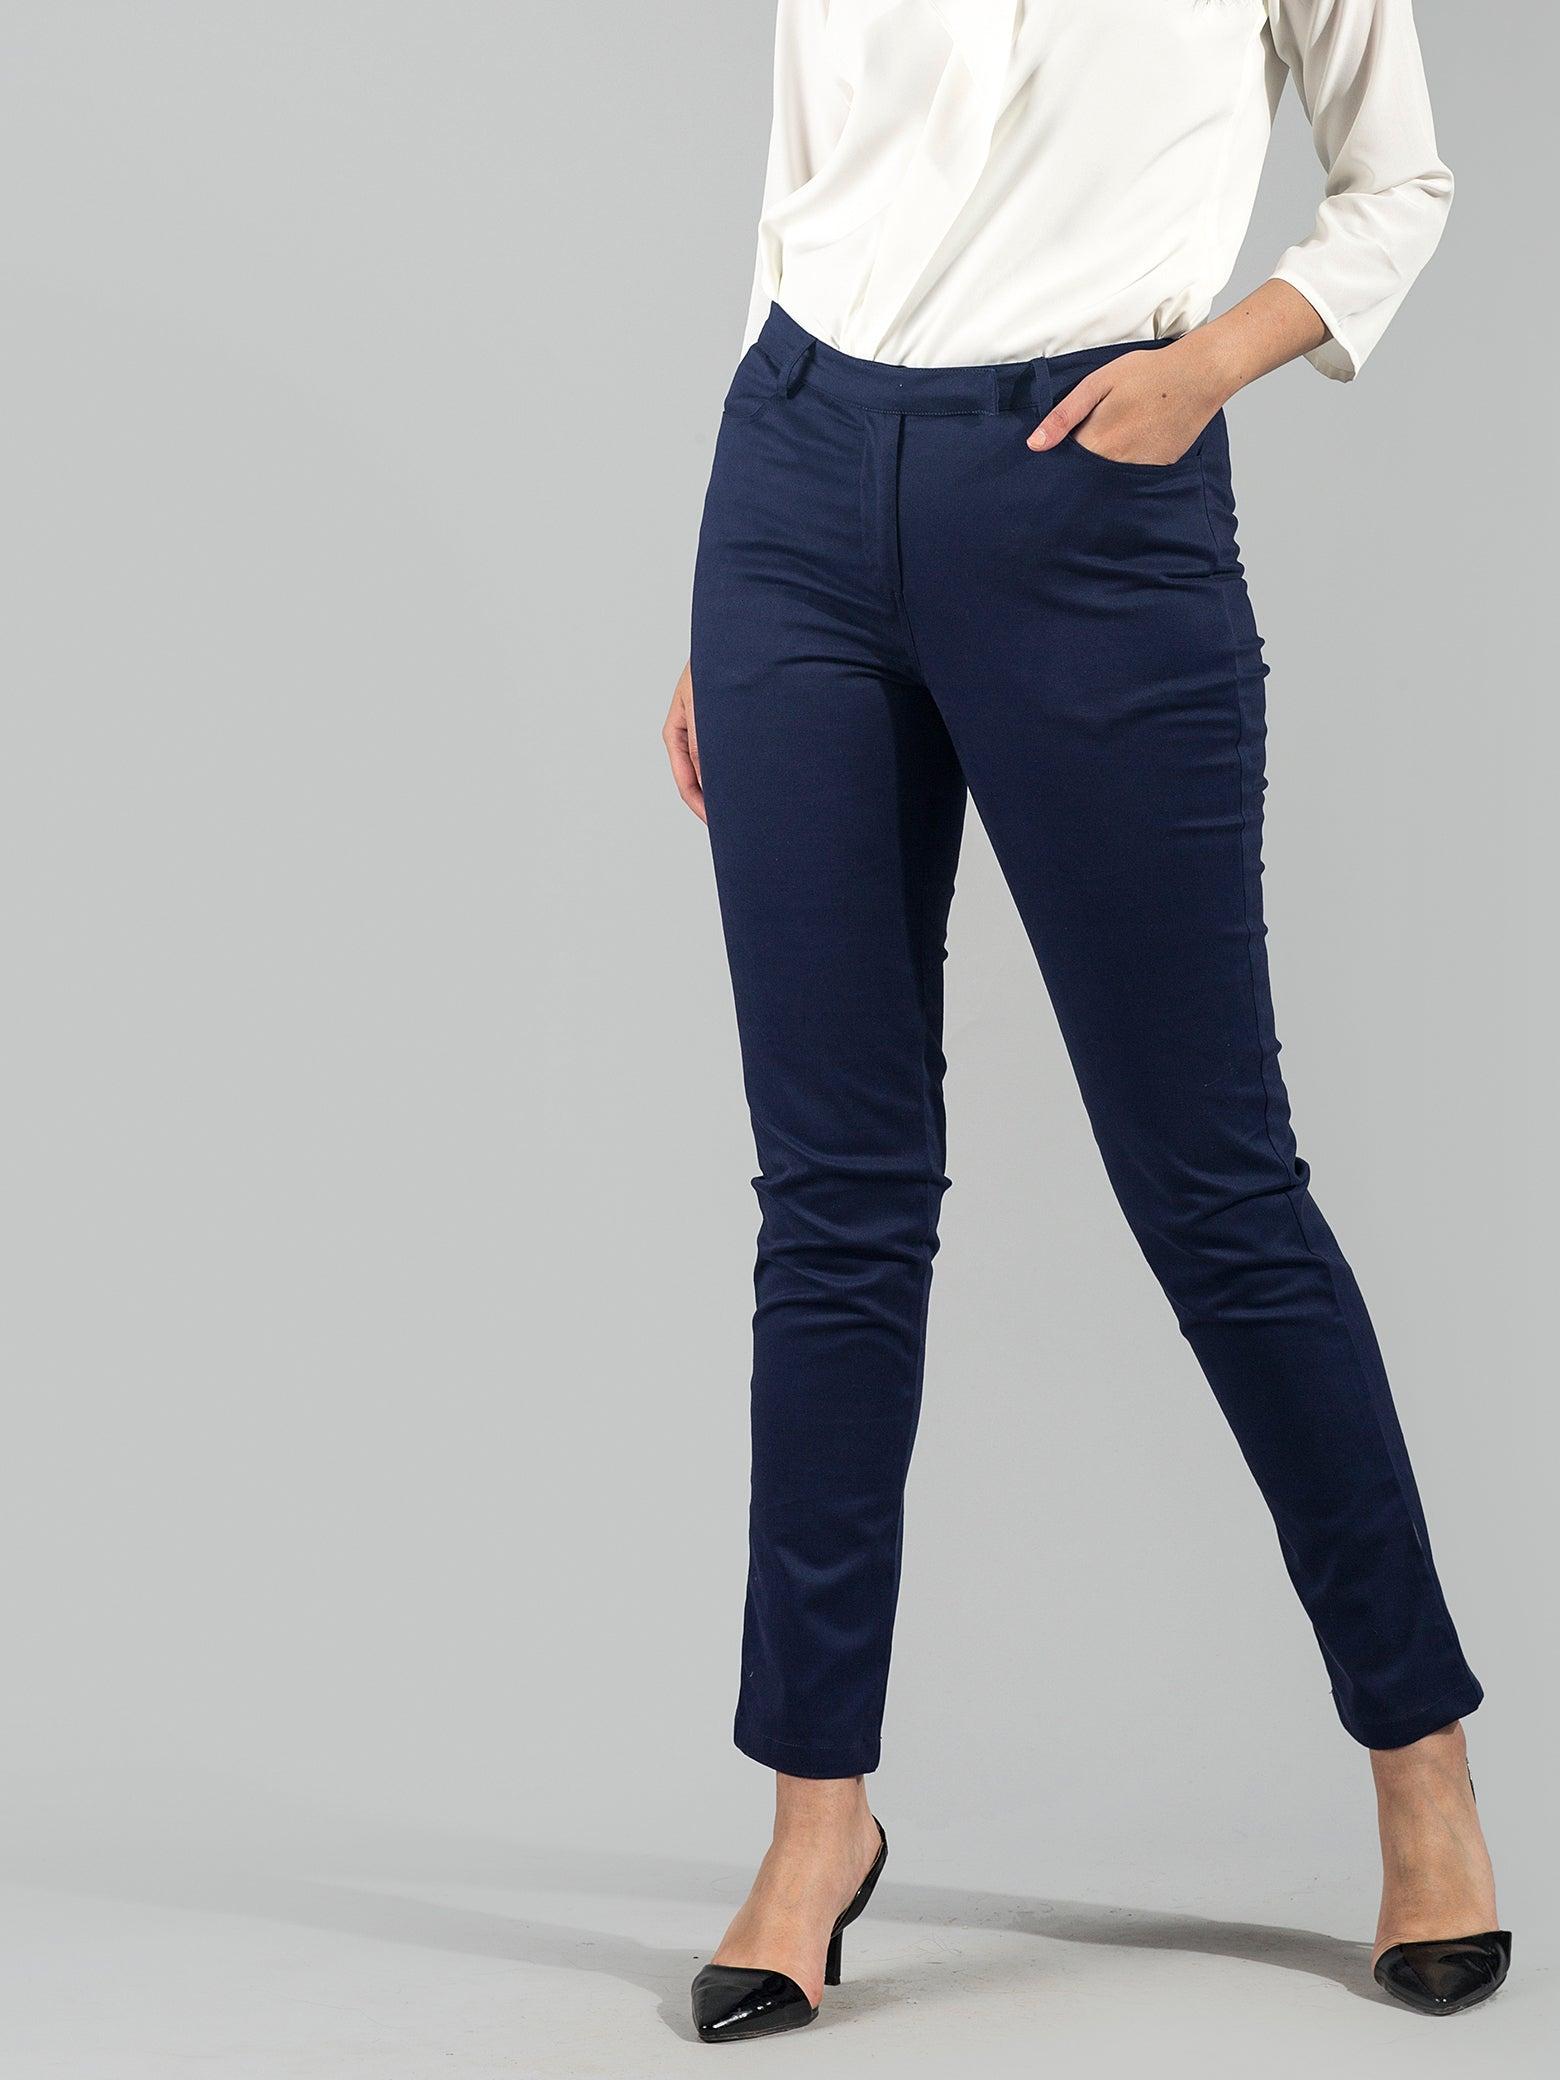 Essential Comfort Trousers - Navy| Formal Trousers